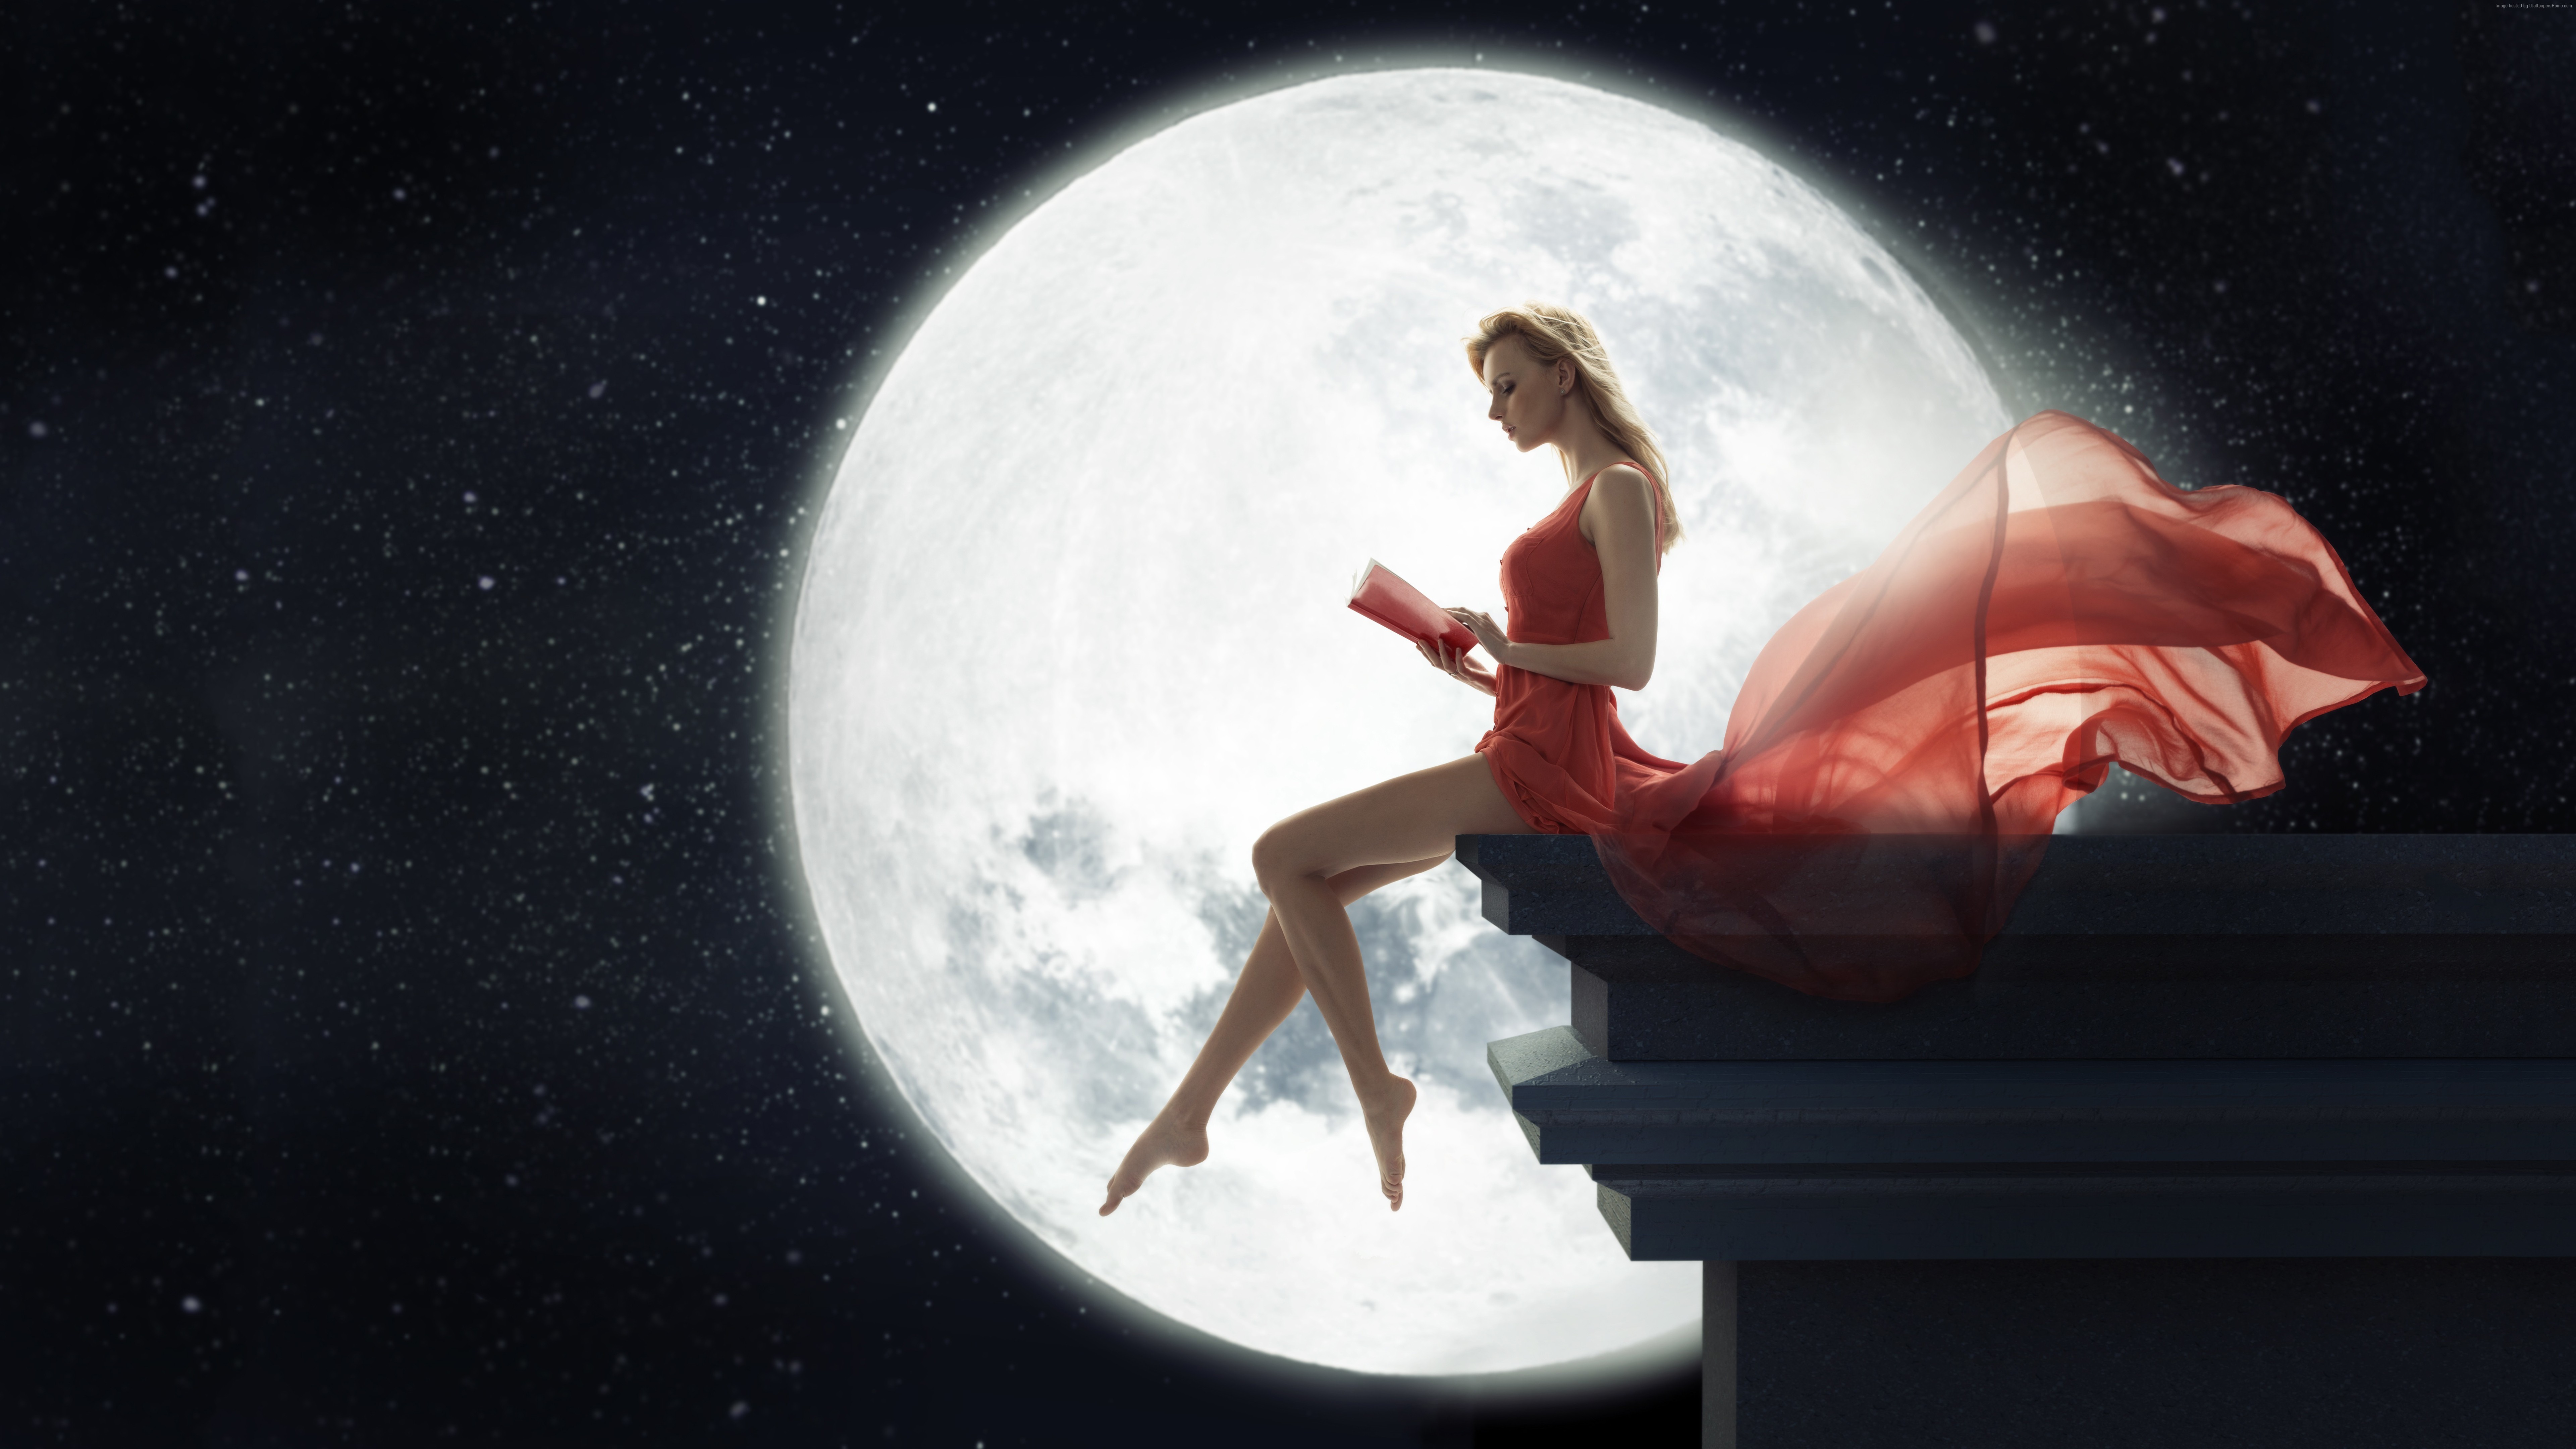 women, feet, fantasy, blonde, book, gown, moon, red dress Free Stock Photo